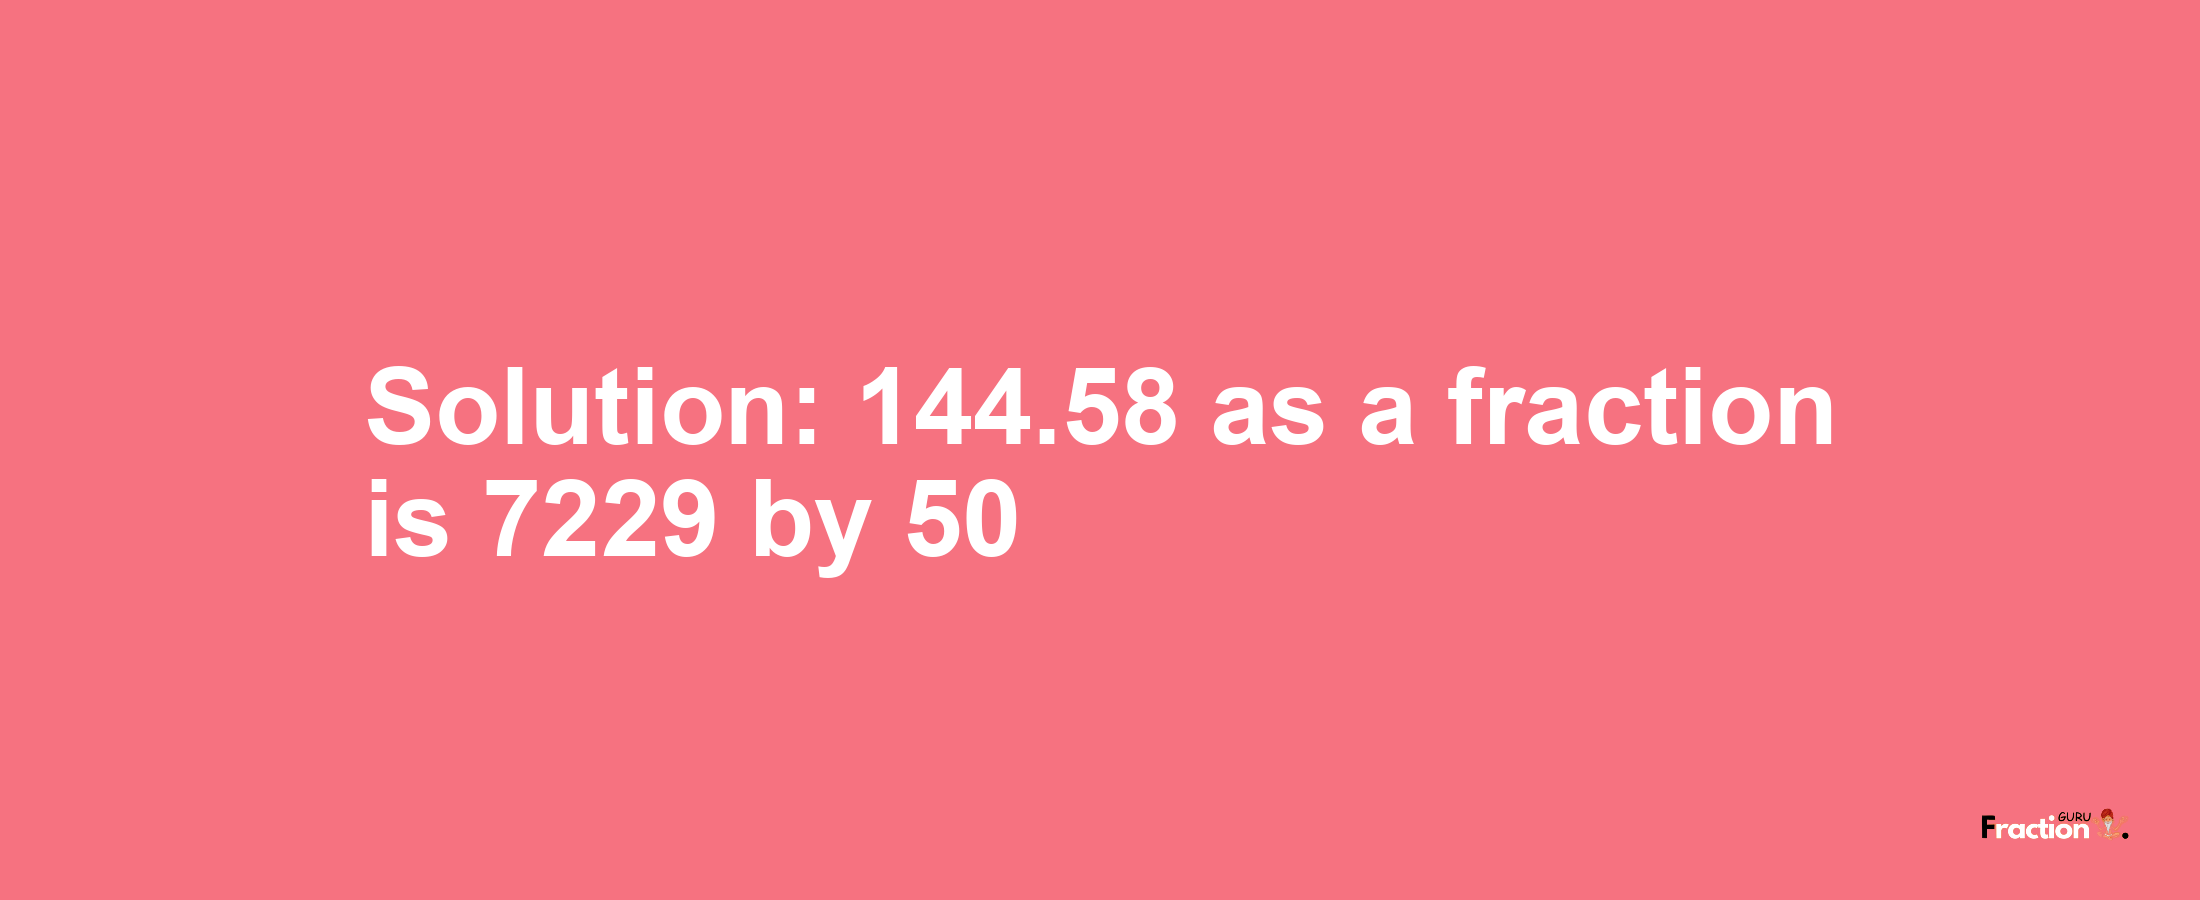 Solution:144.58 as a fraction is 7229/50